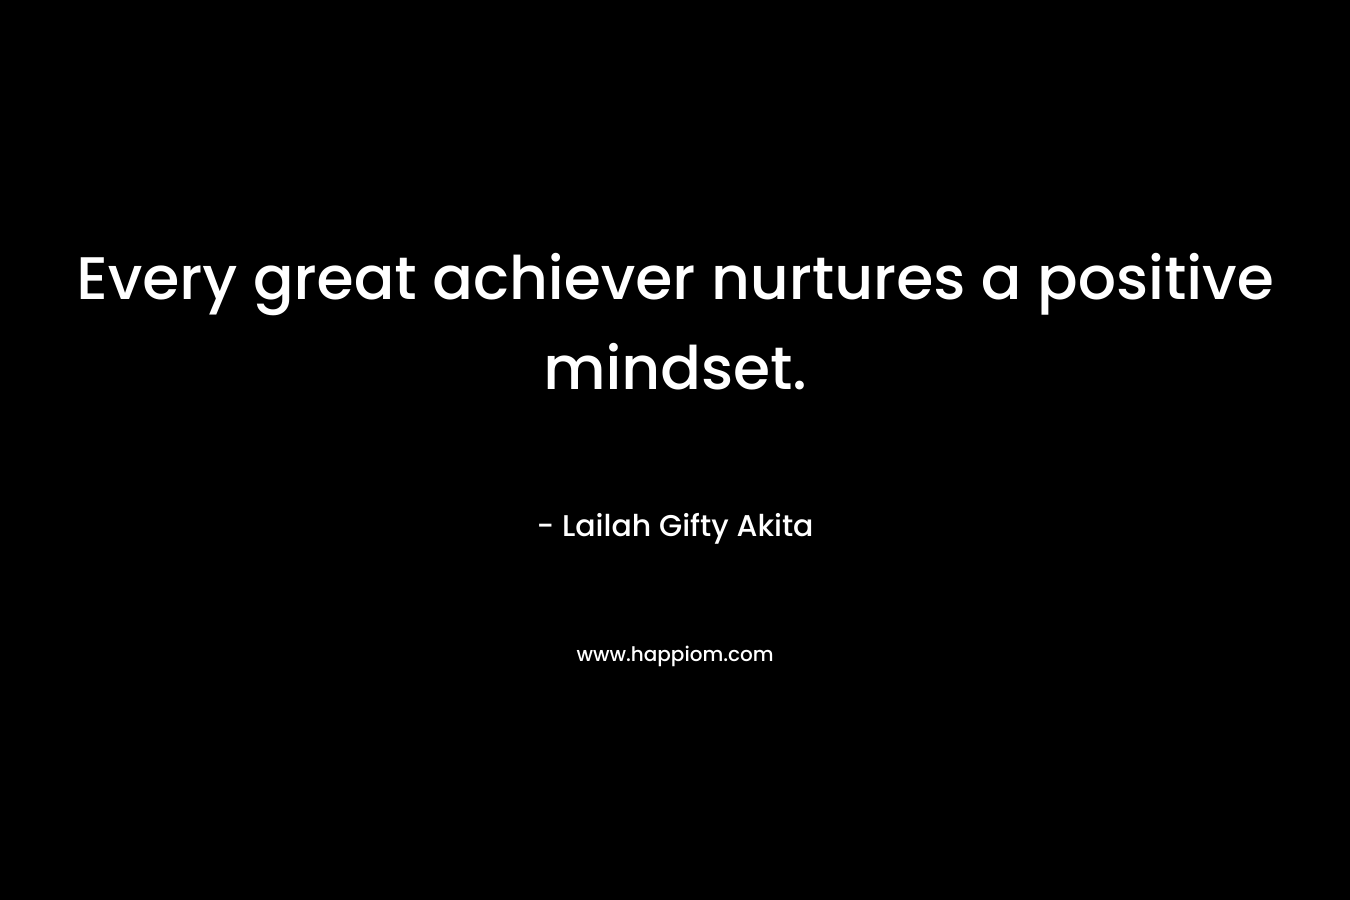 Every great achiever nurtures a positive mindset.